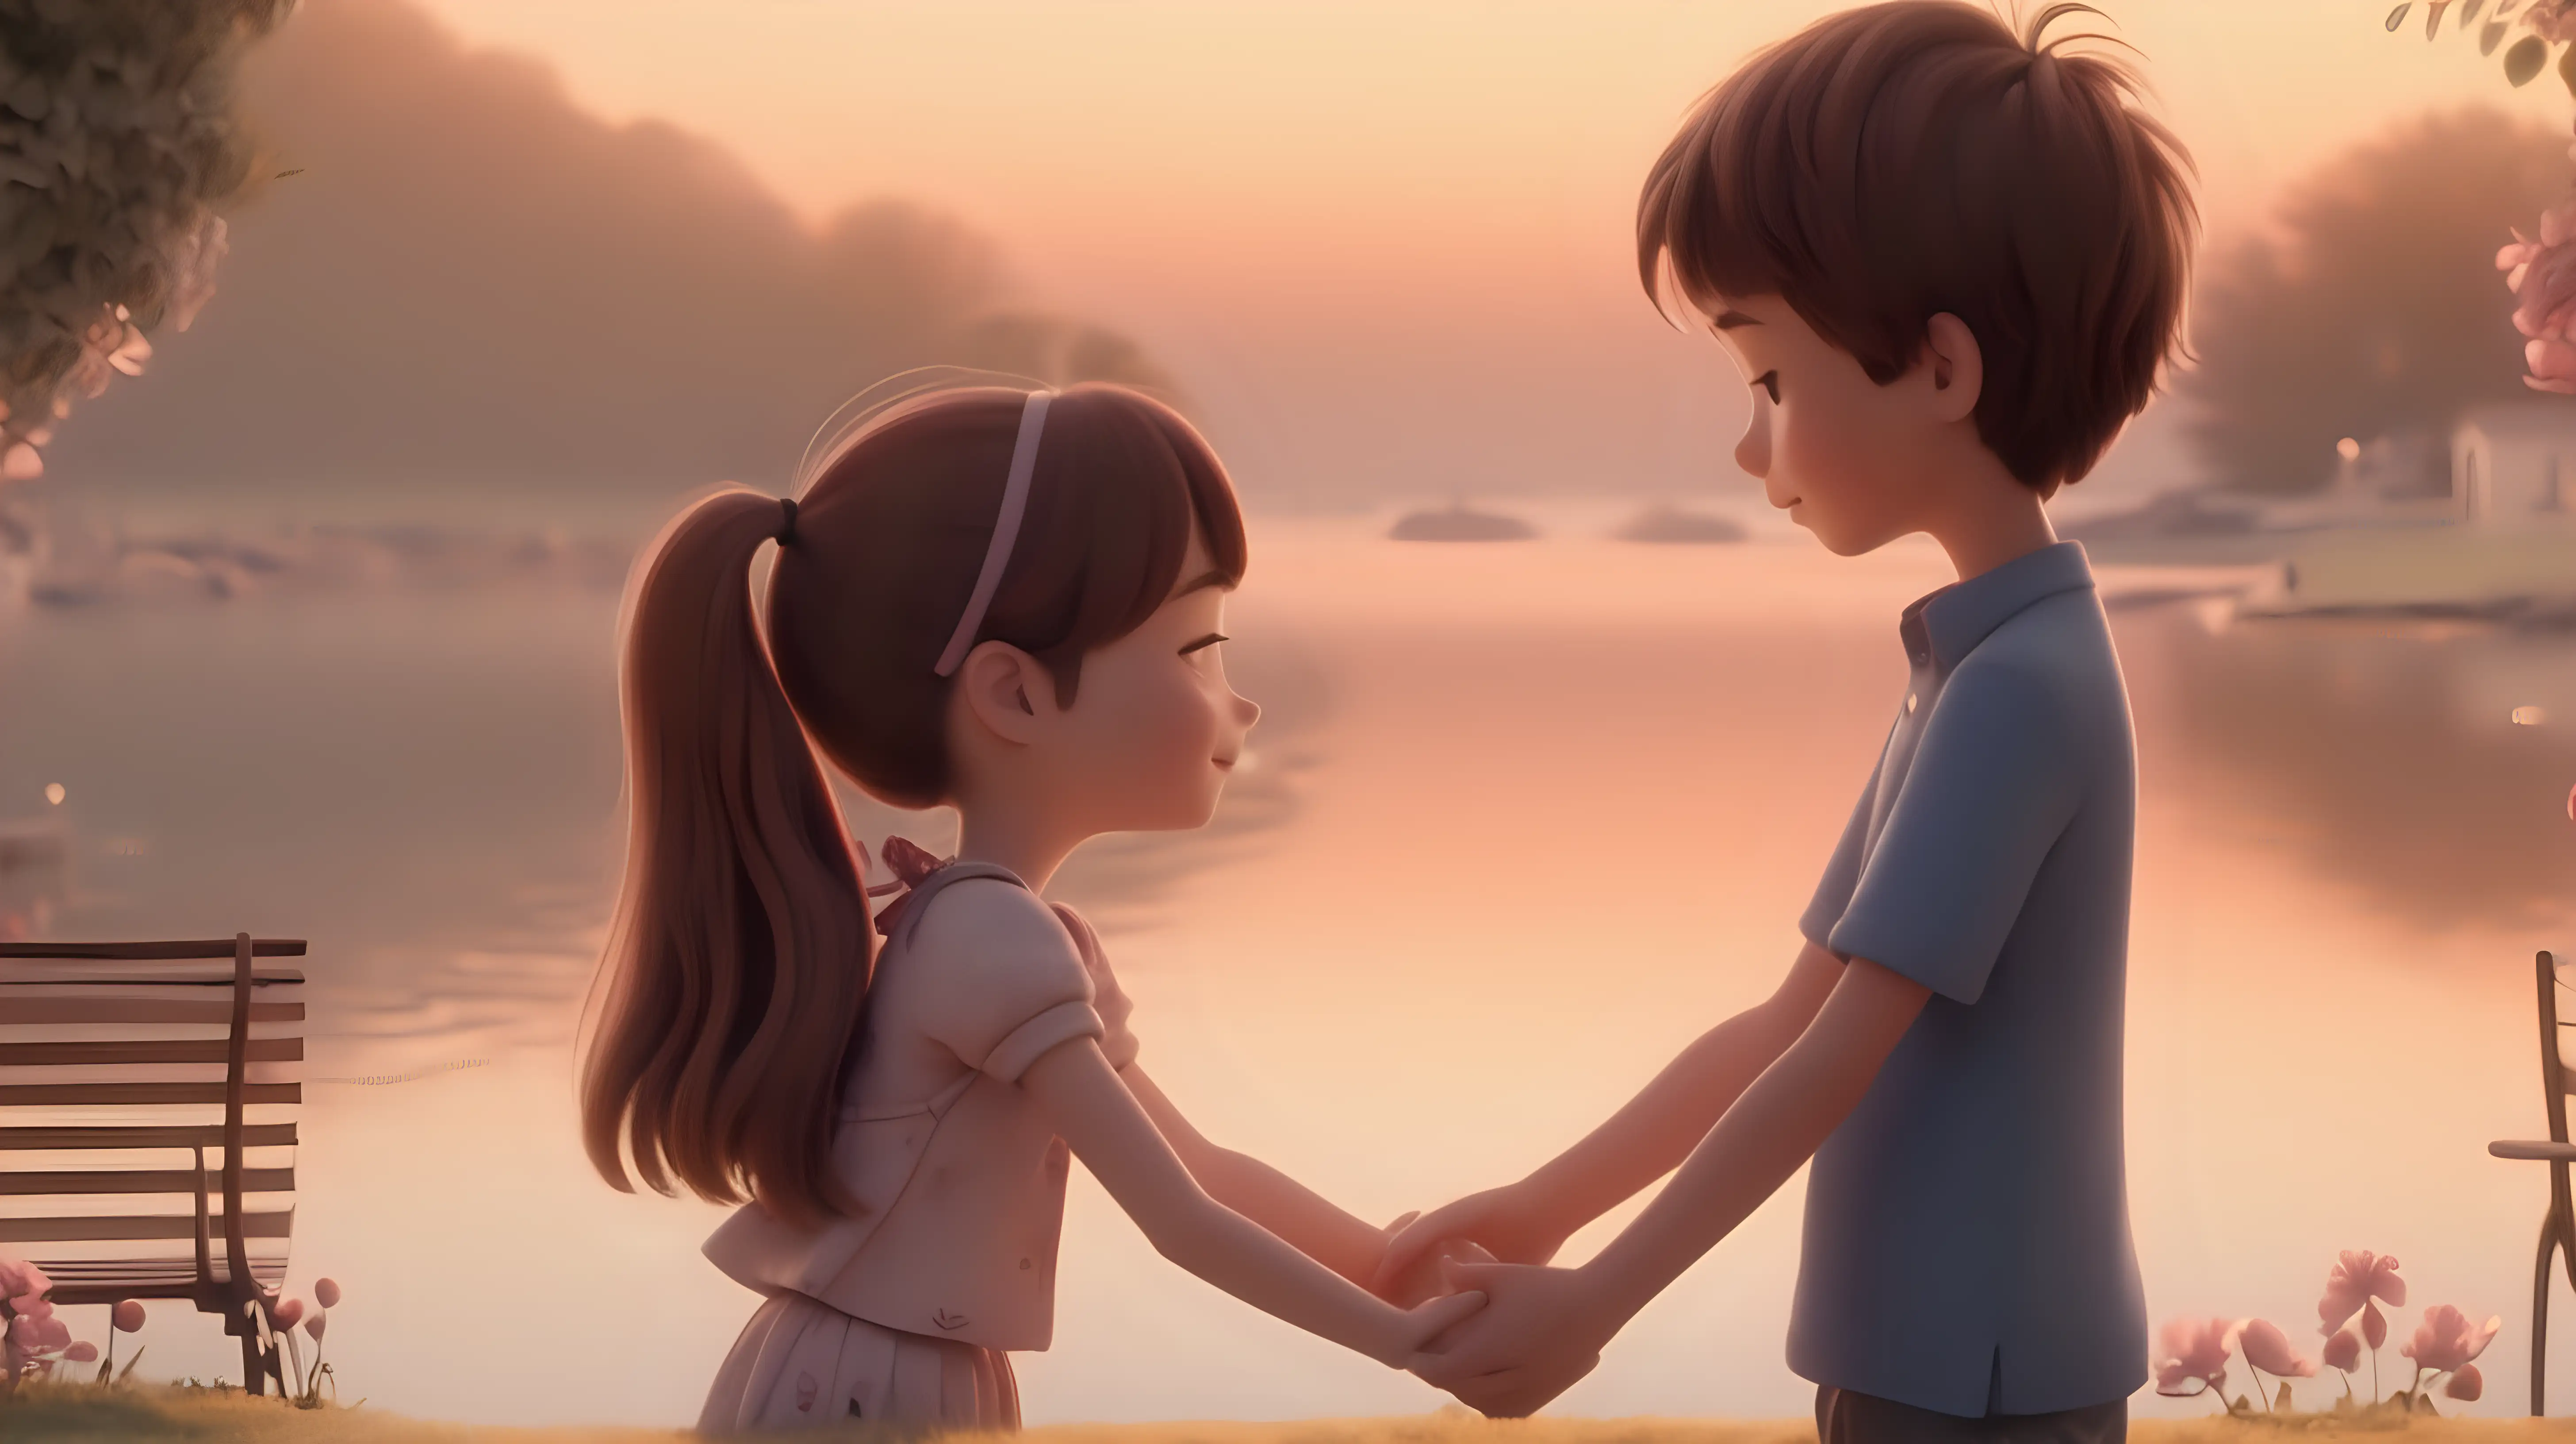 Romantic Animation of Boy and Girl Sharing Tender Embrace in Serene Setting